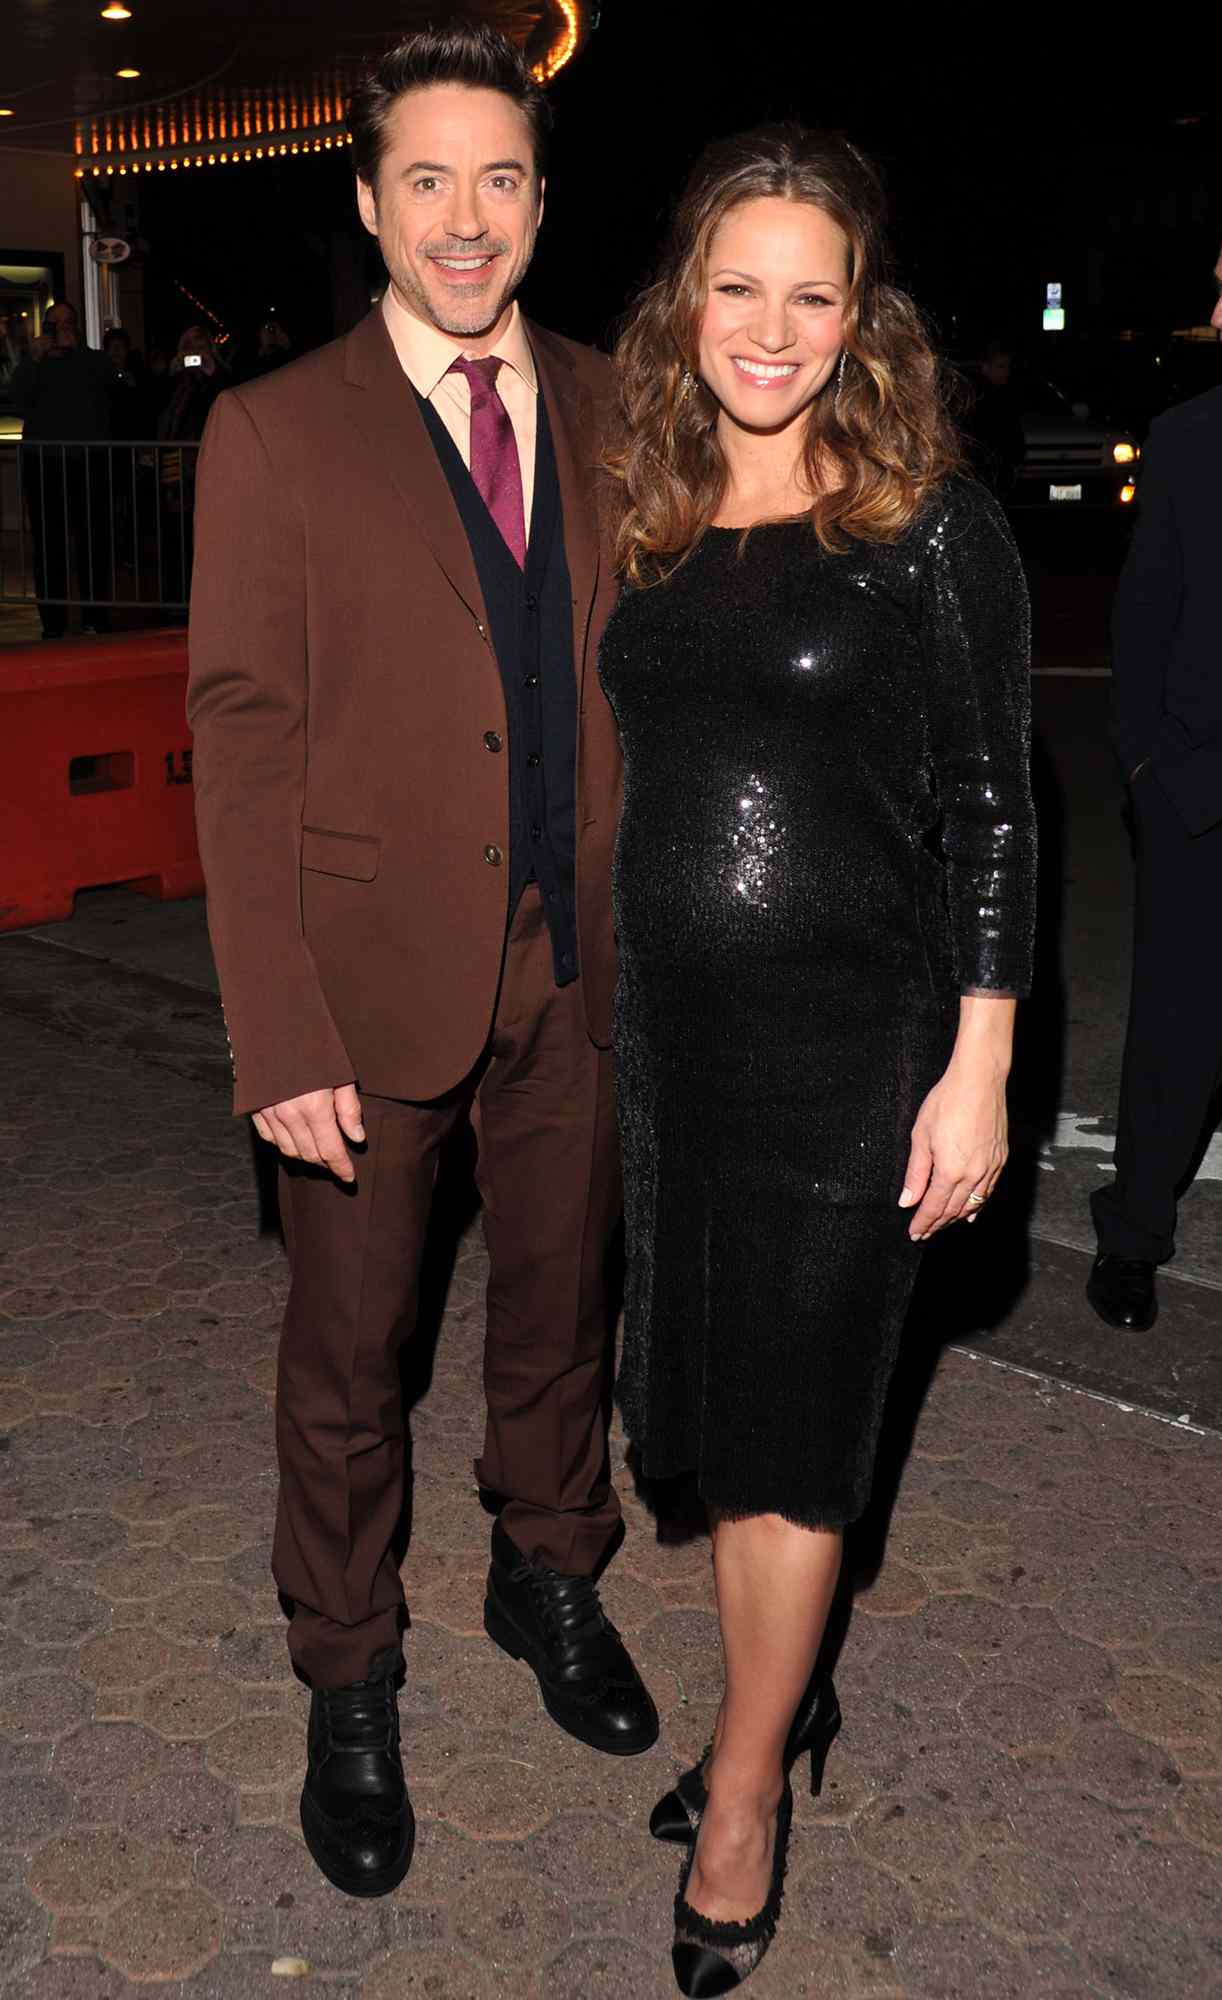 Robert Downey Jr. and producer Susan Downey arrive at the Los Angeles premiere of "Sherlock Holmes: A Game Of Shadows" at Regency Village Theatre on December 6, 2011 in Westwood, California